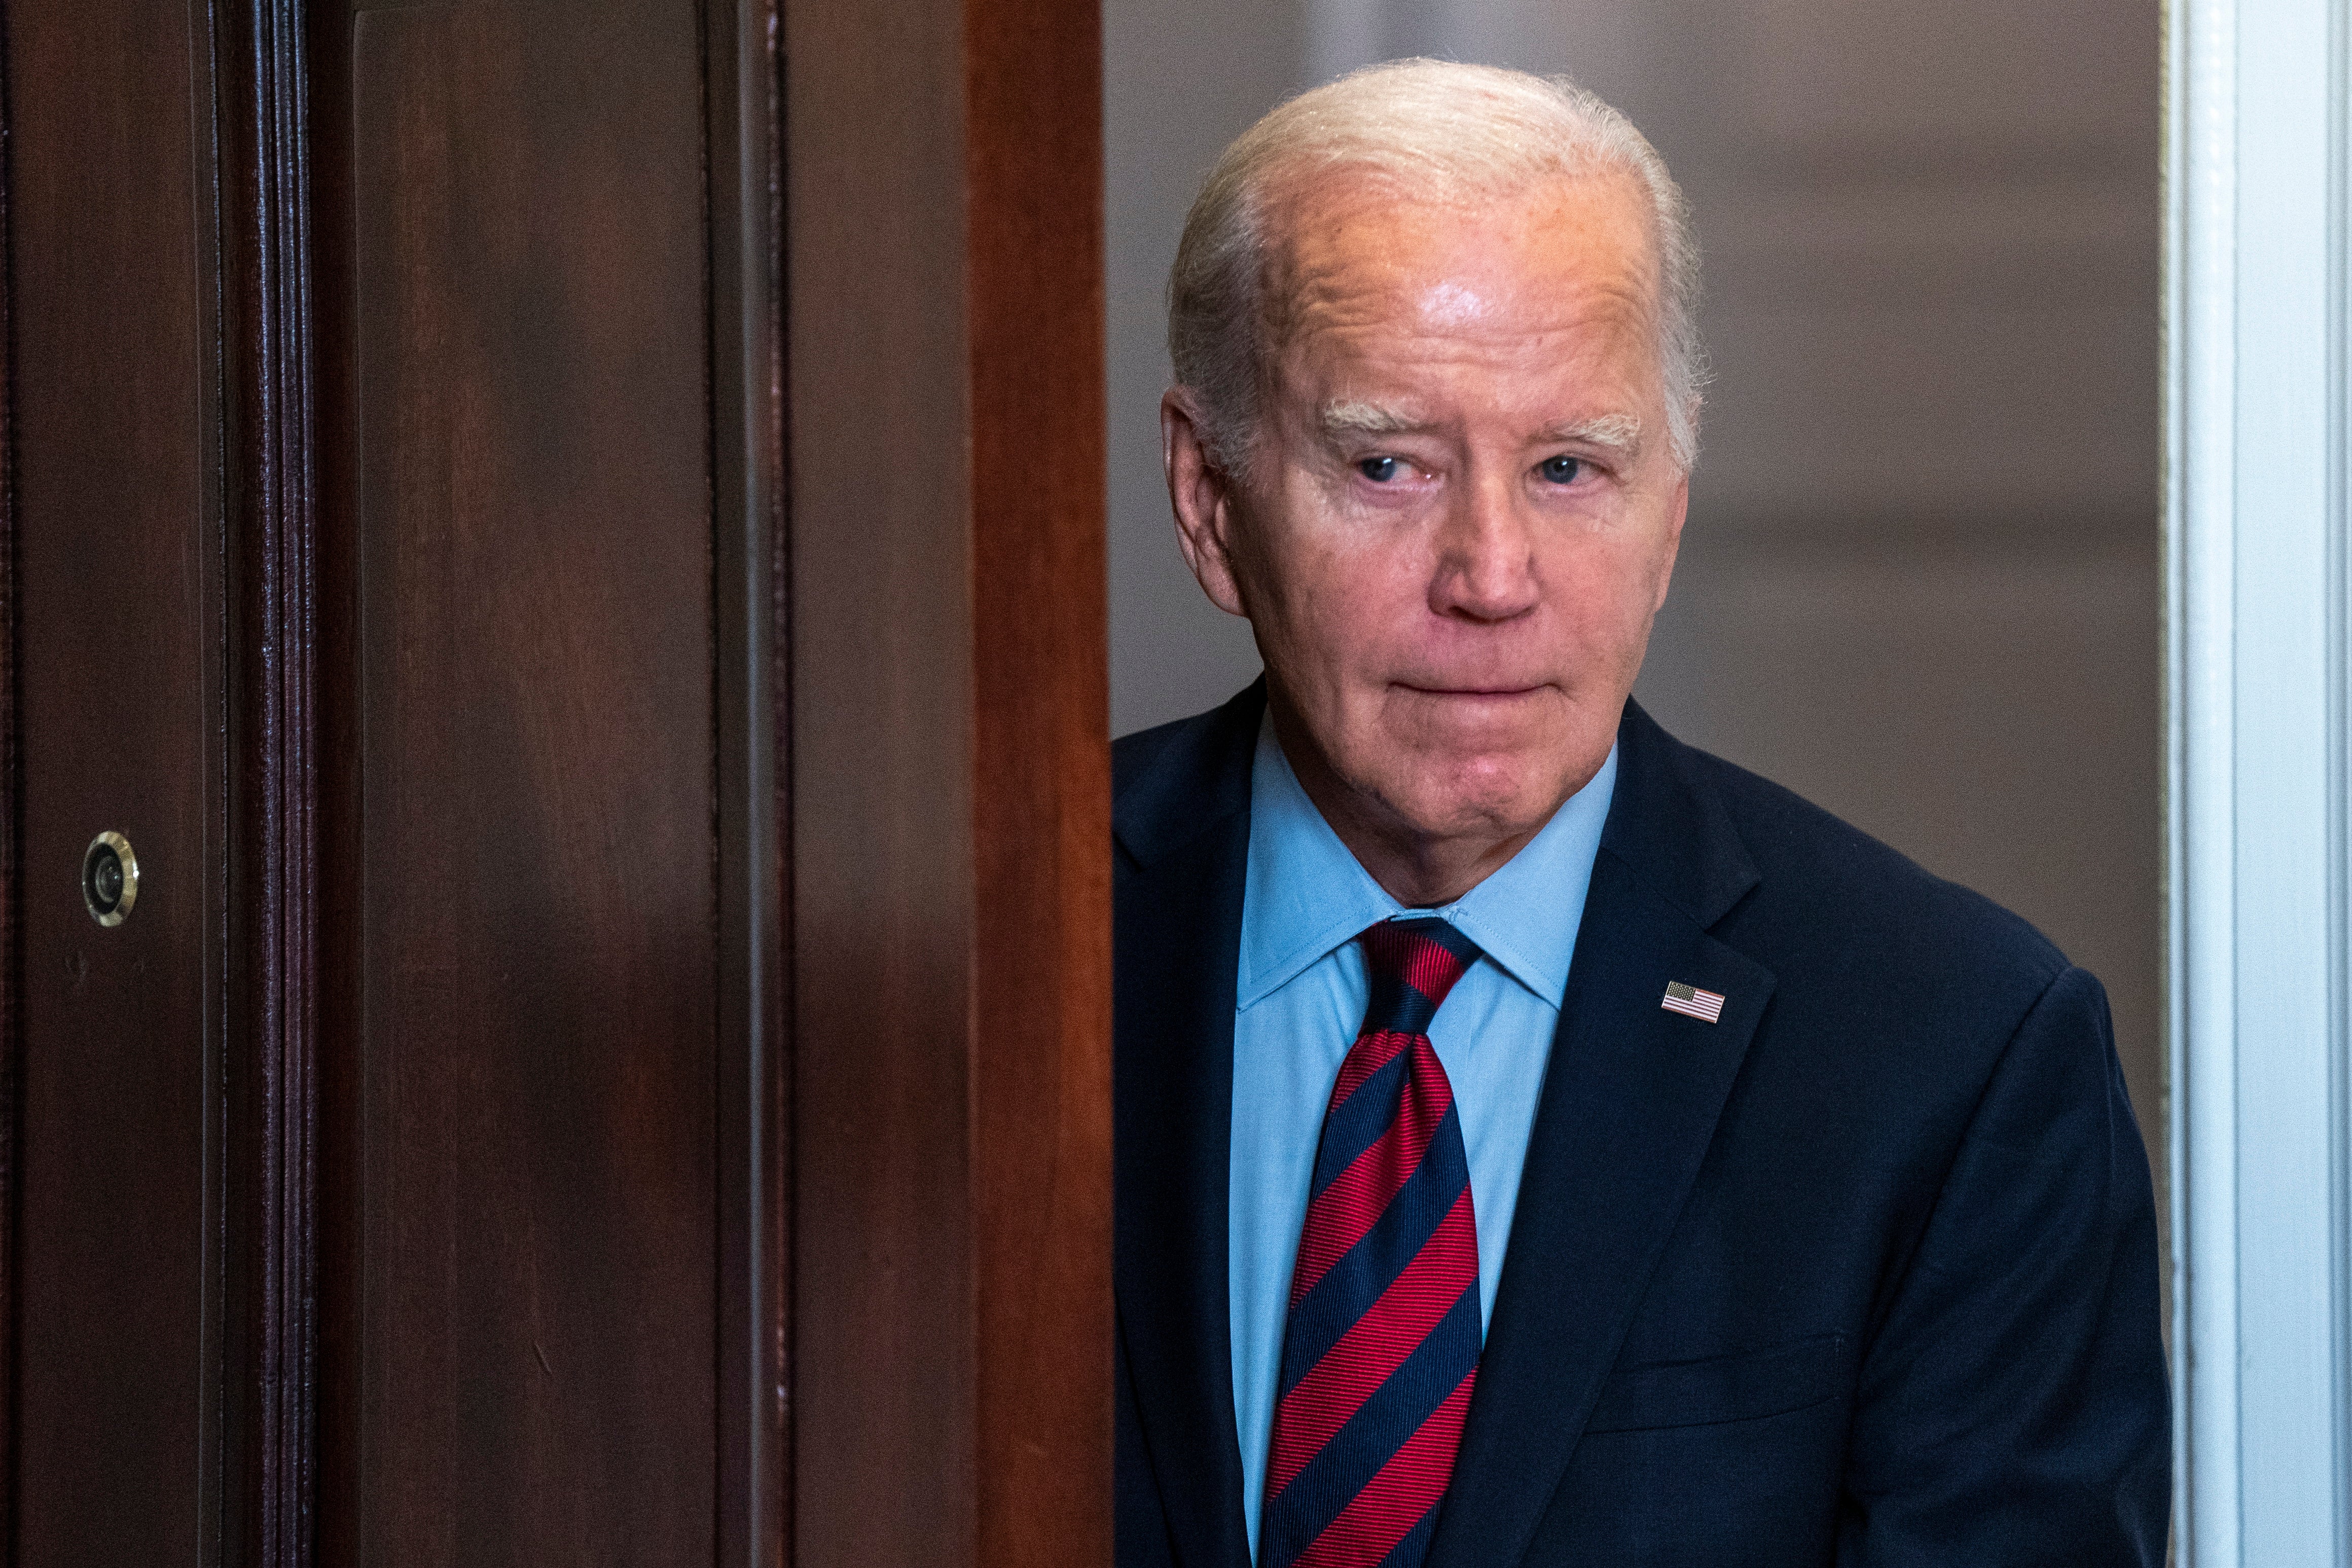 President Joe Biden appears at the White House to address student loan relief on 4 October.